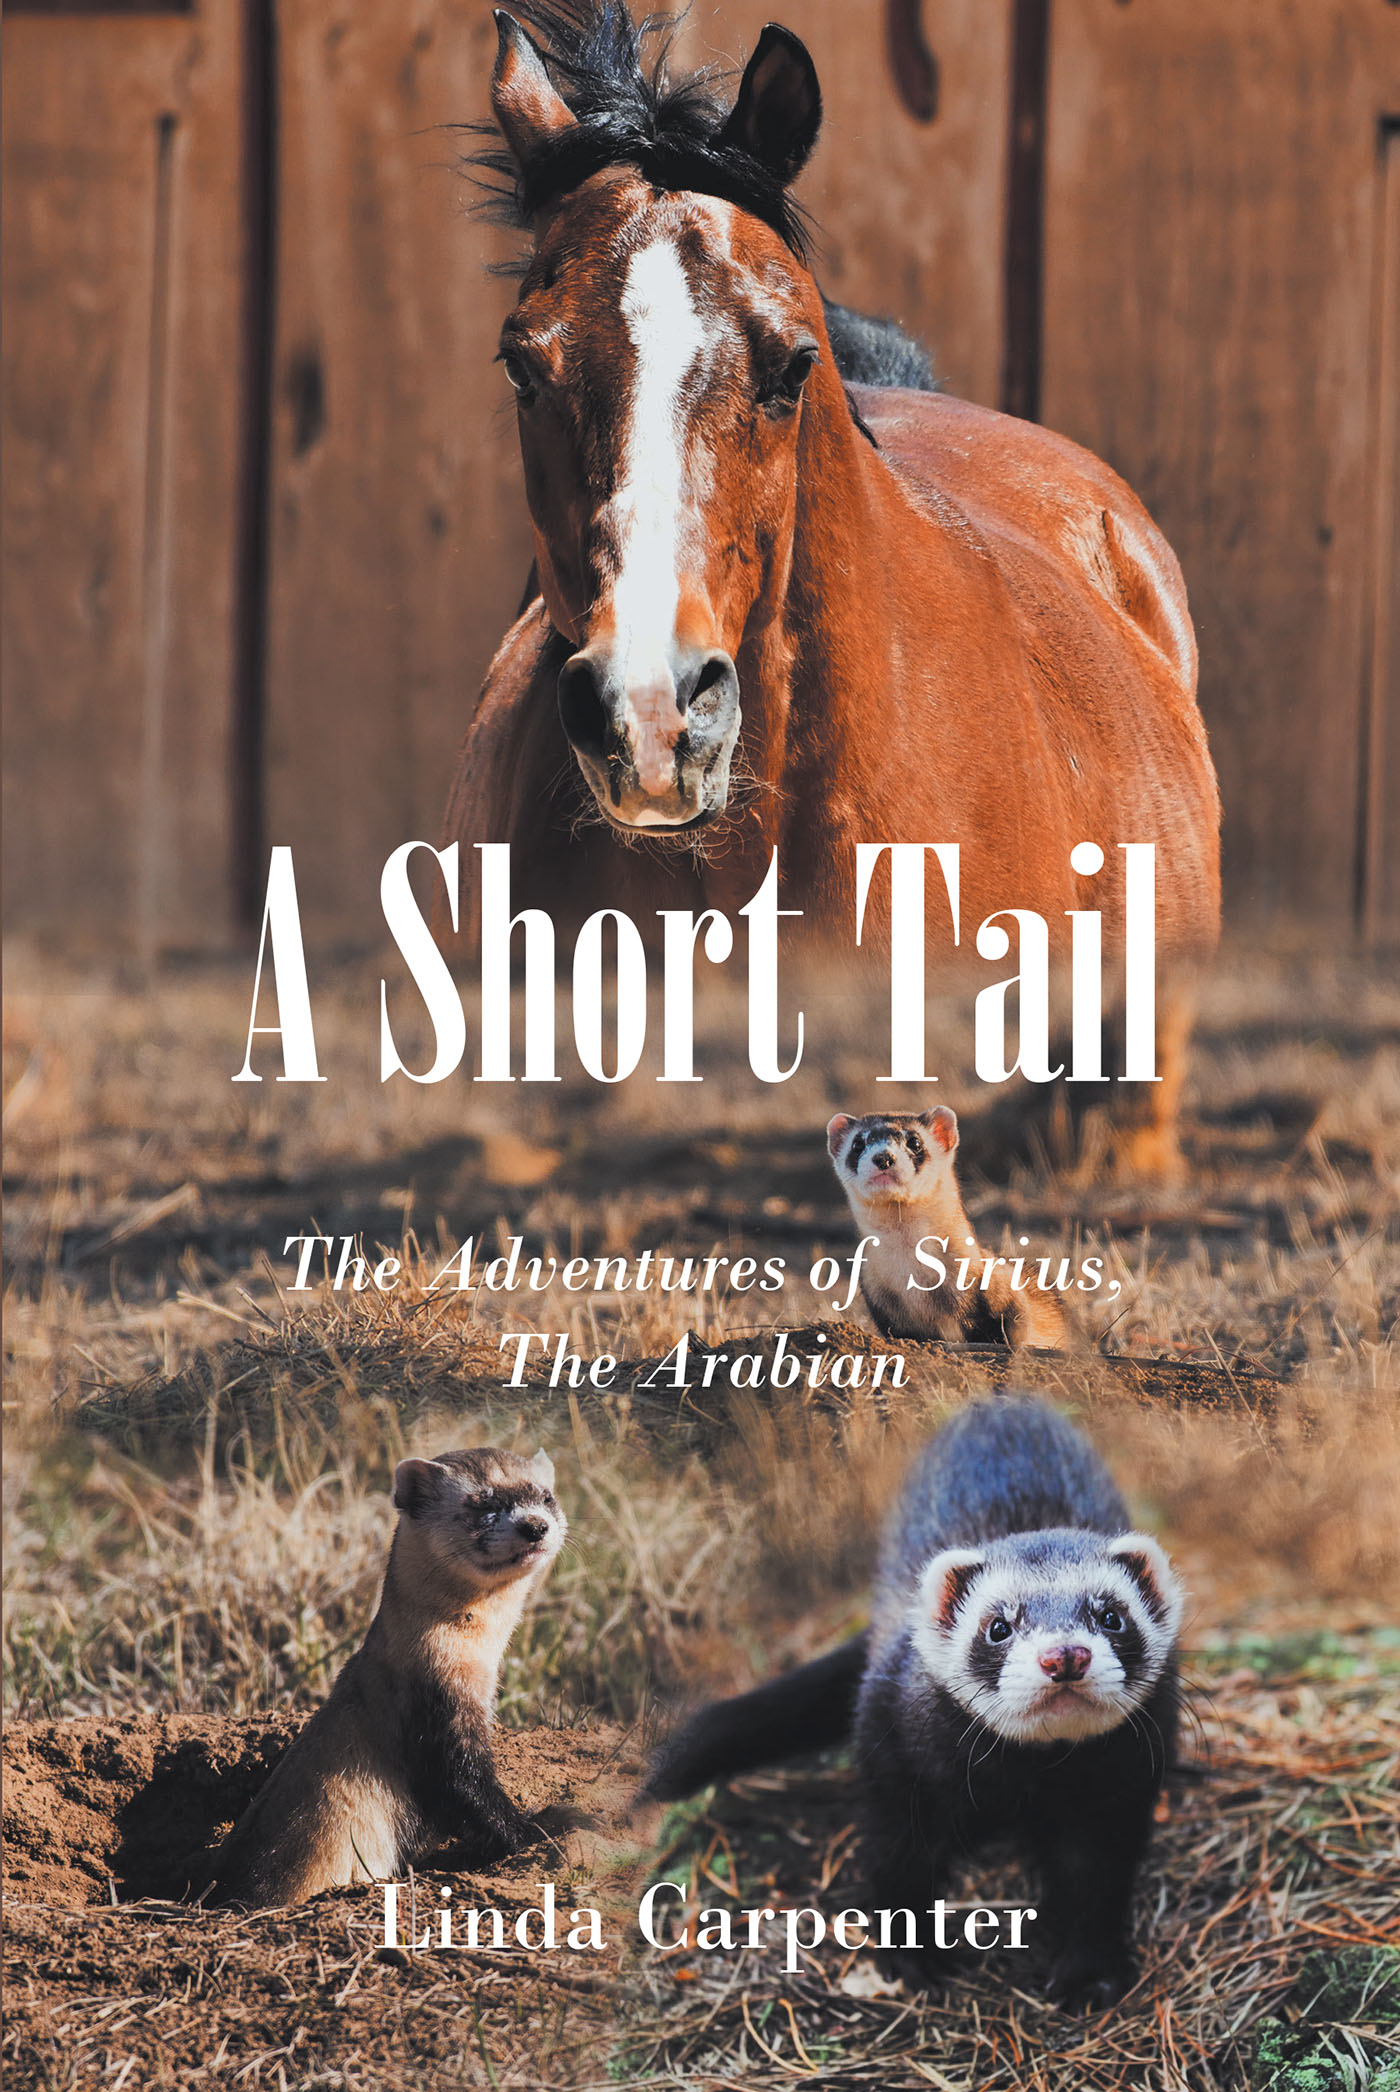 Author Linda Carpenter’s New Book, "A Short Tail," is the Captivating Story of a Brave Arabian Horse Who Uses His Newly Found Magic for a Very Important Quest